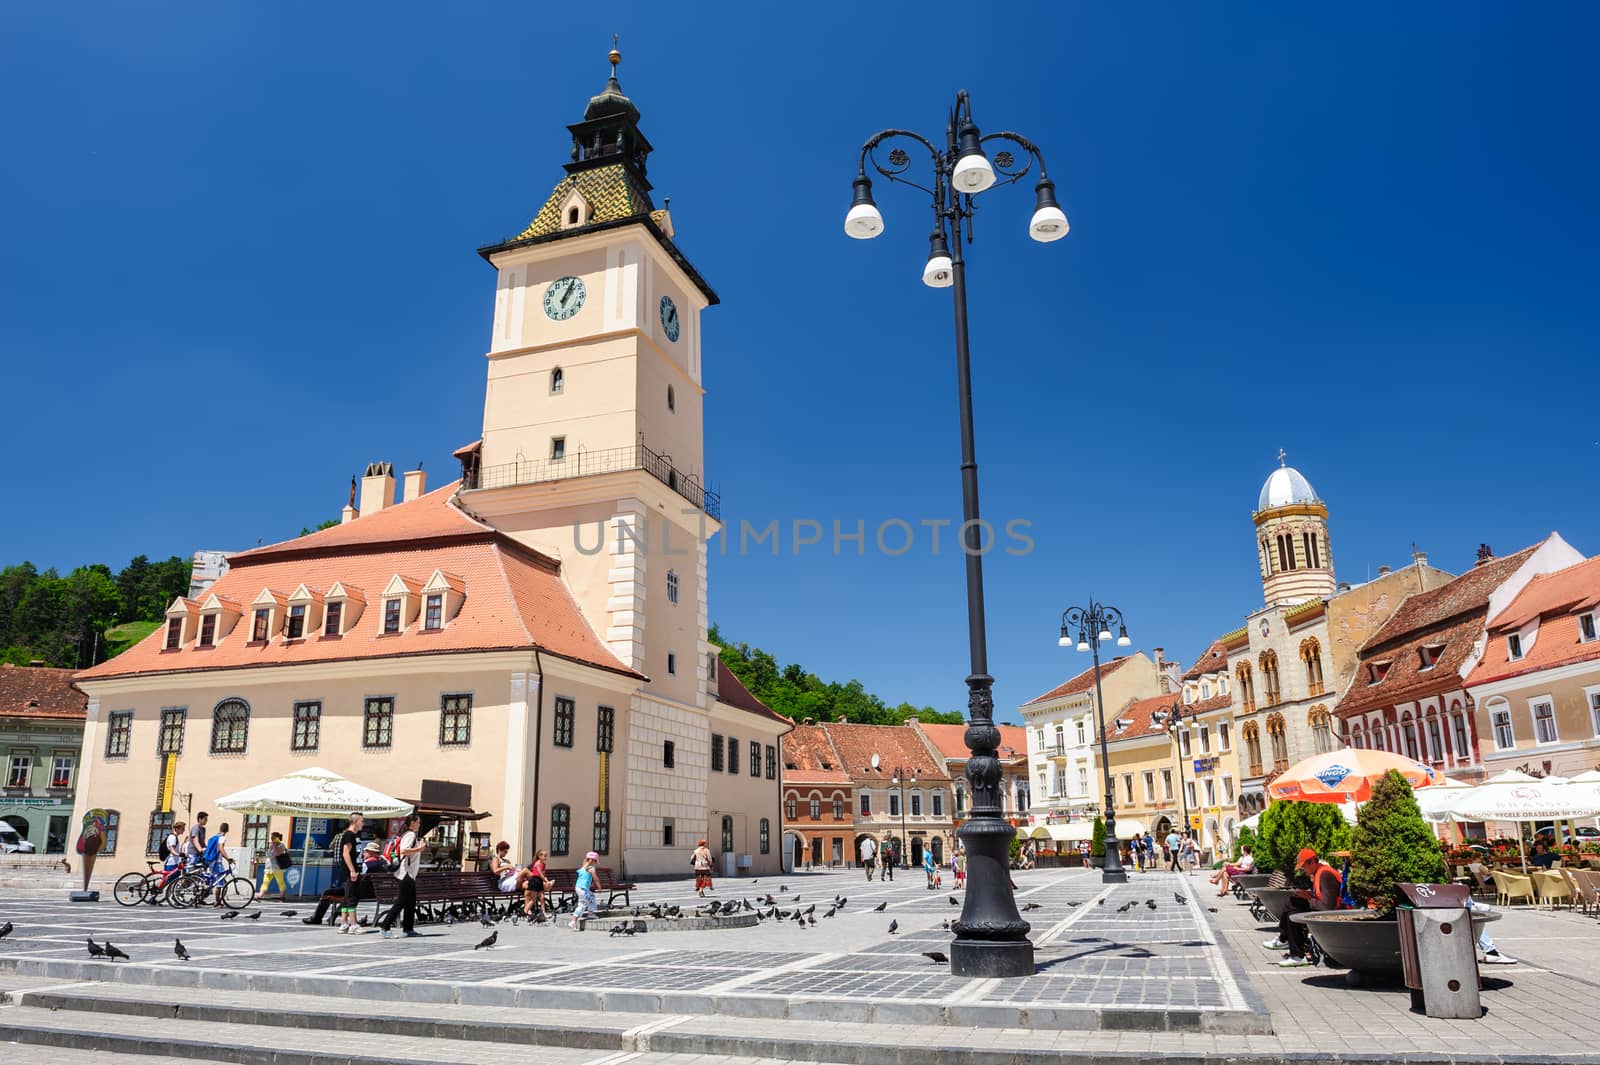 Brasov, Transylvania, Romania, 6th July 2015: rasov Council Square is historical center of city, people walkinng and sitting at outdoor terraces and restaurants.